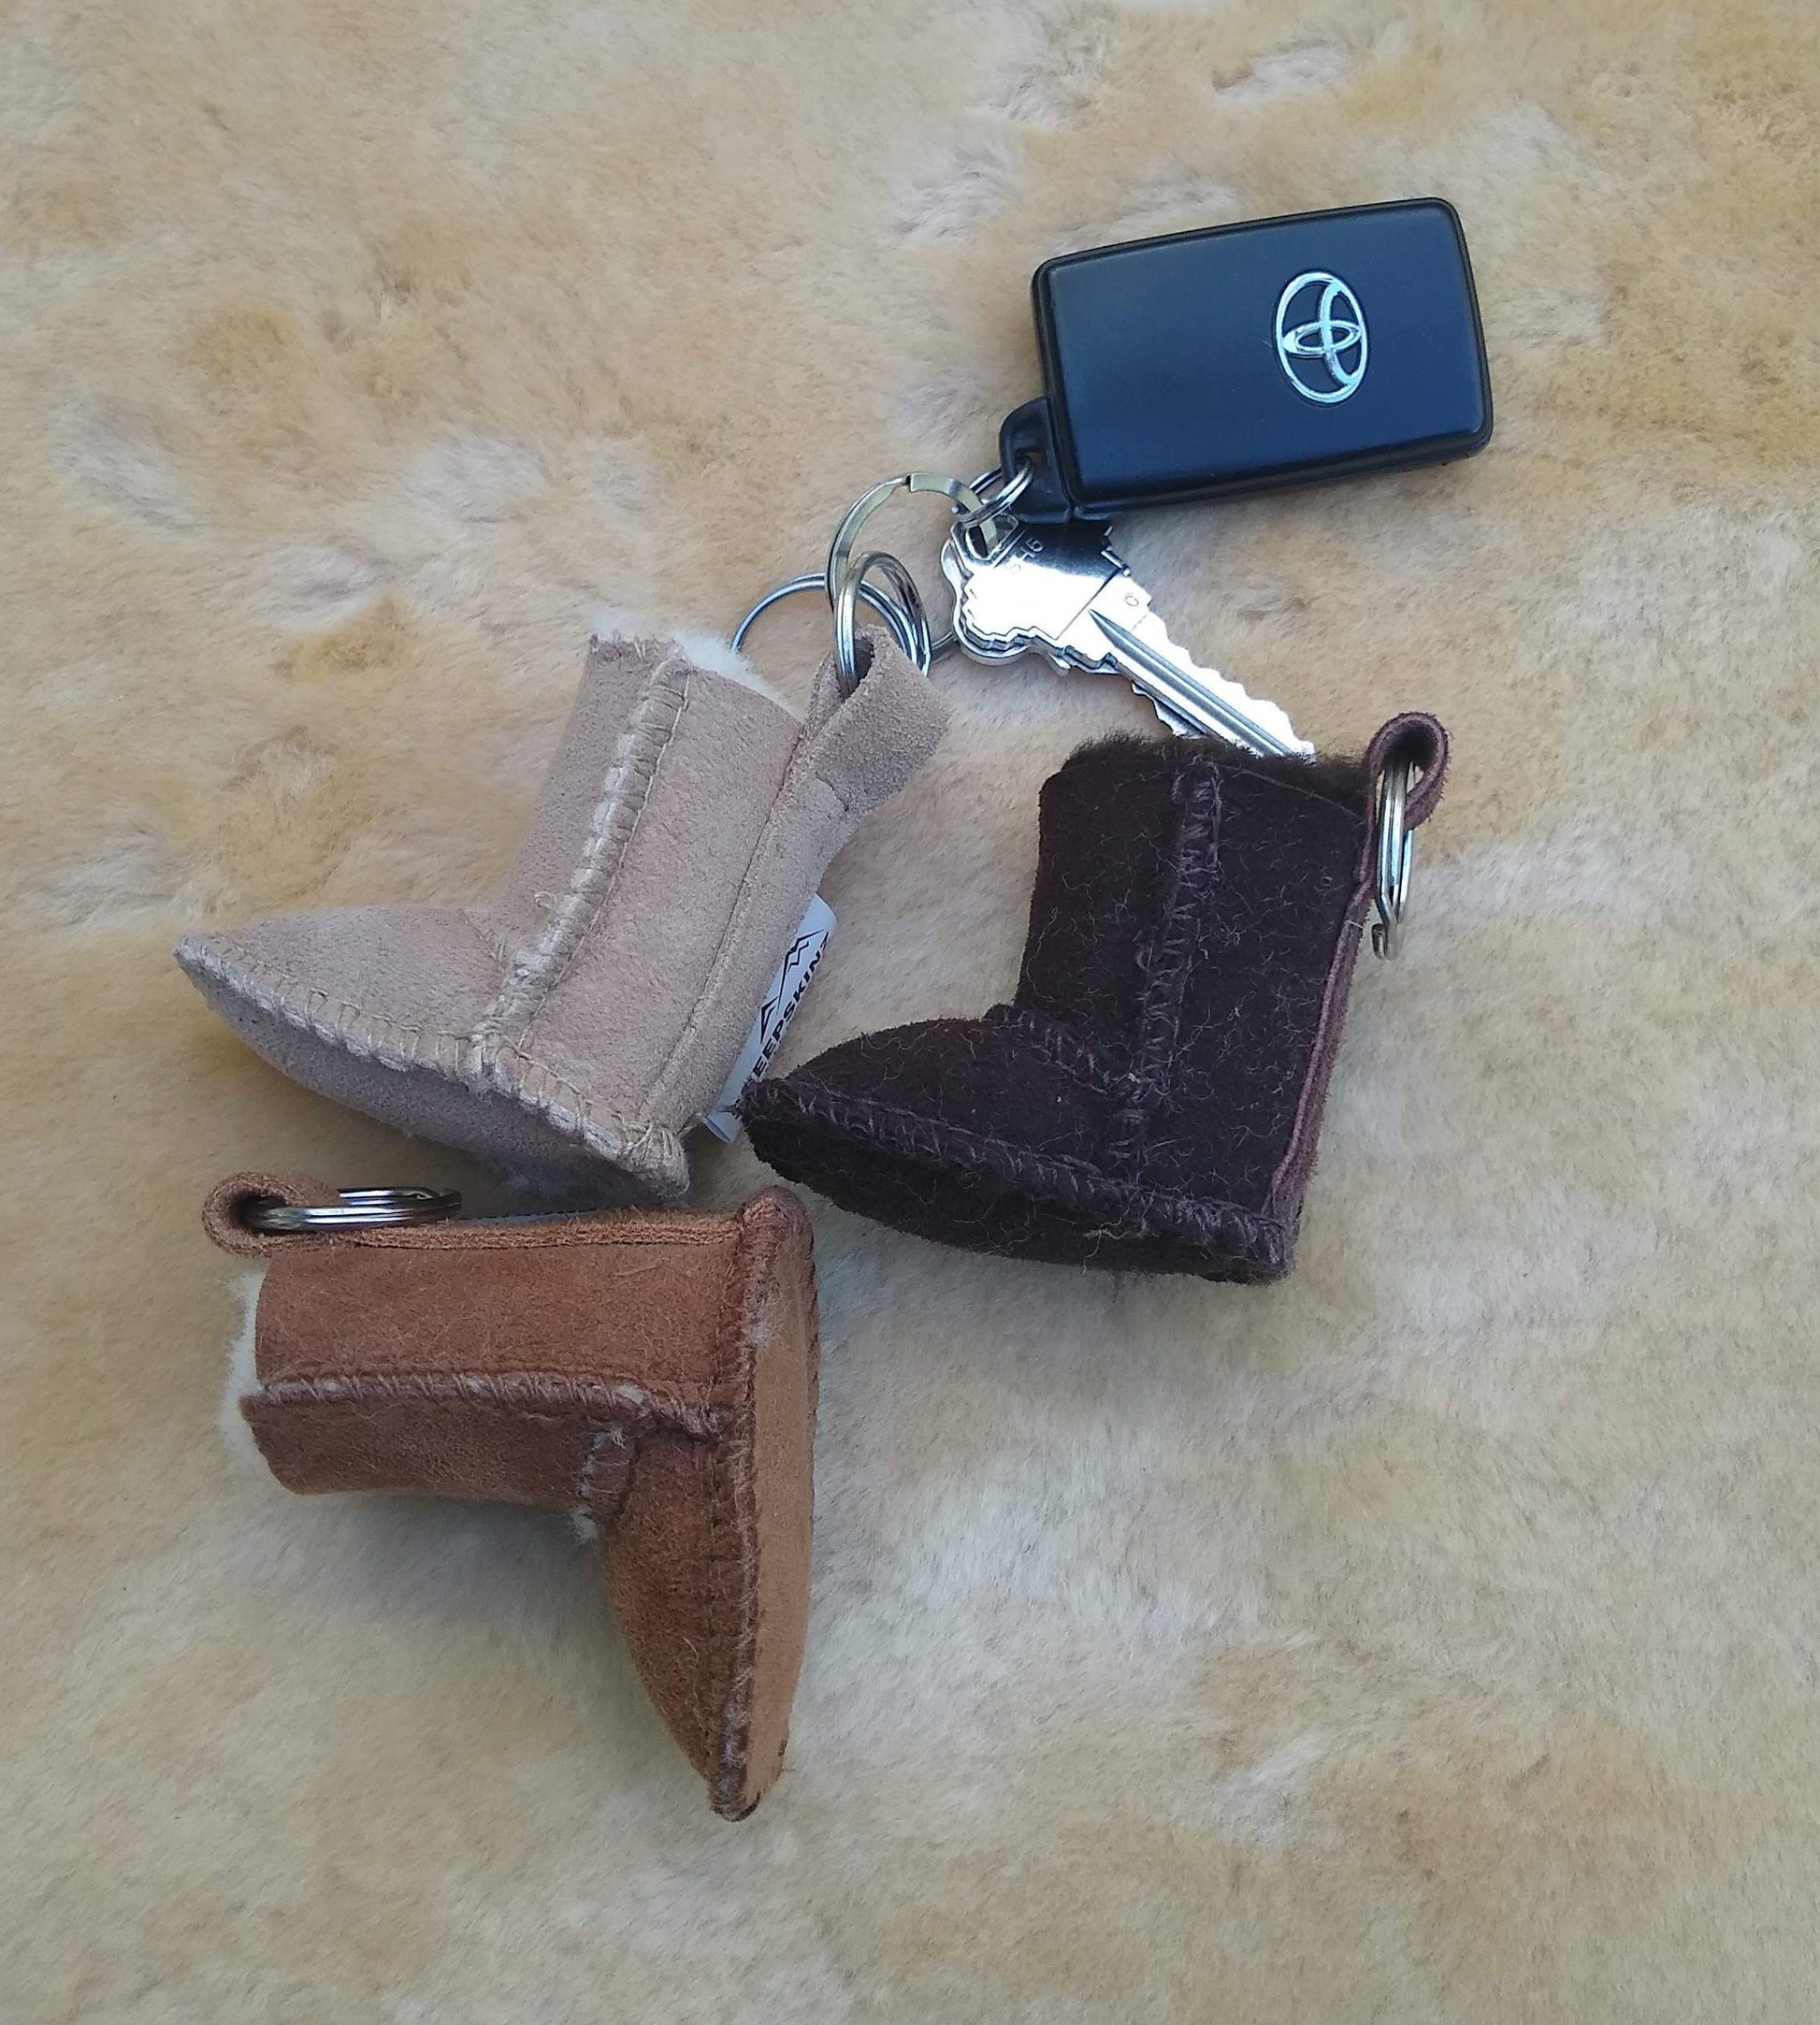 MICRO UGG KEY RING - Woolshed Gallery